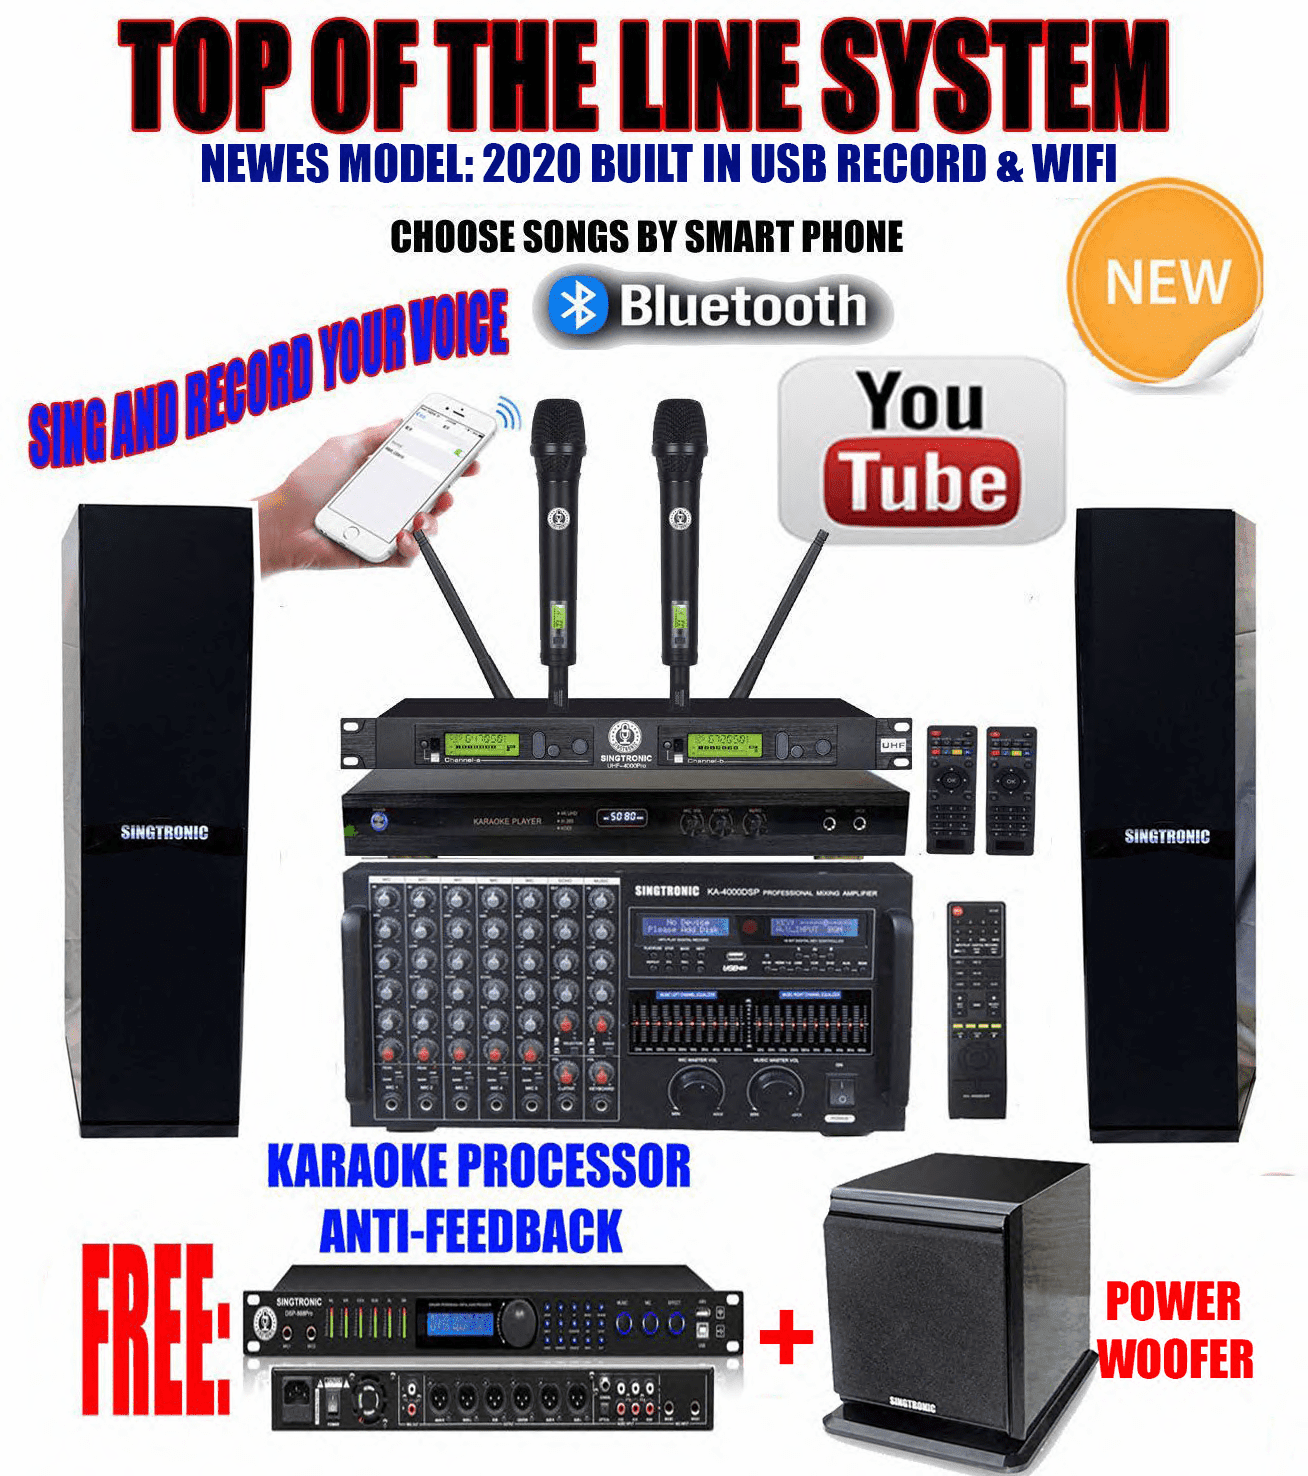 Singtronic Professional Complete 4000W Karaoke System Top of The Line ...